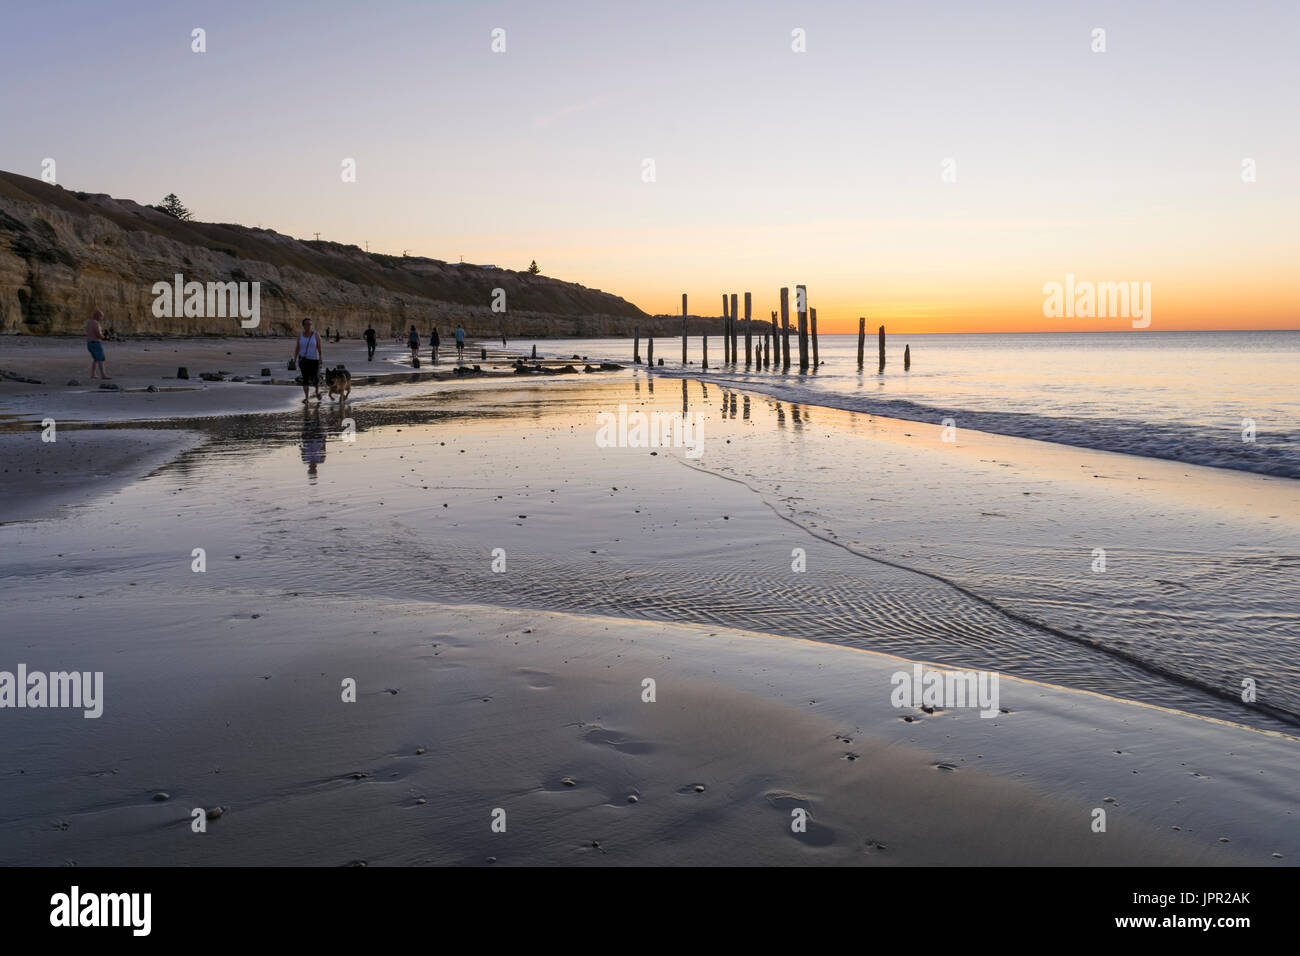 PORT WILLUNGA BEACH, SOUTH AUSTRALIA / AUSTRALIA - DECEMBER 15, 2015: People walking on the beach, enjoying the sunset and view of the old jetty ruins Stock Photo